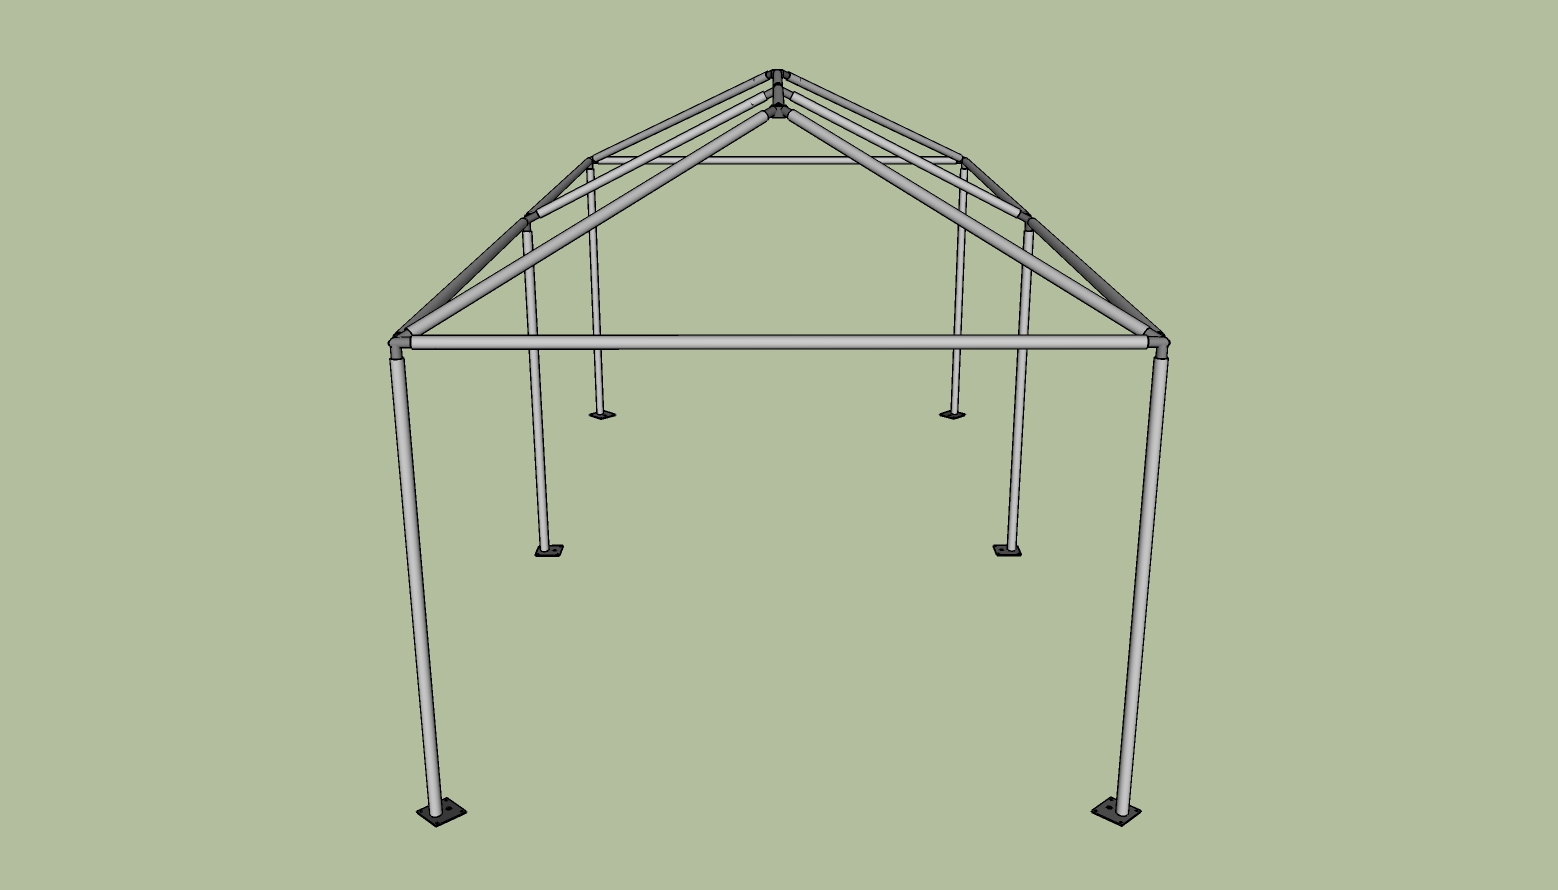 10x20 frame tent side view